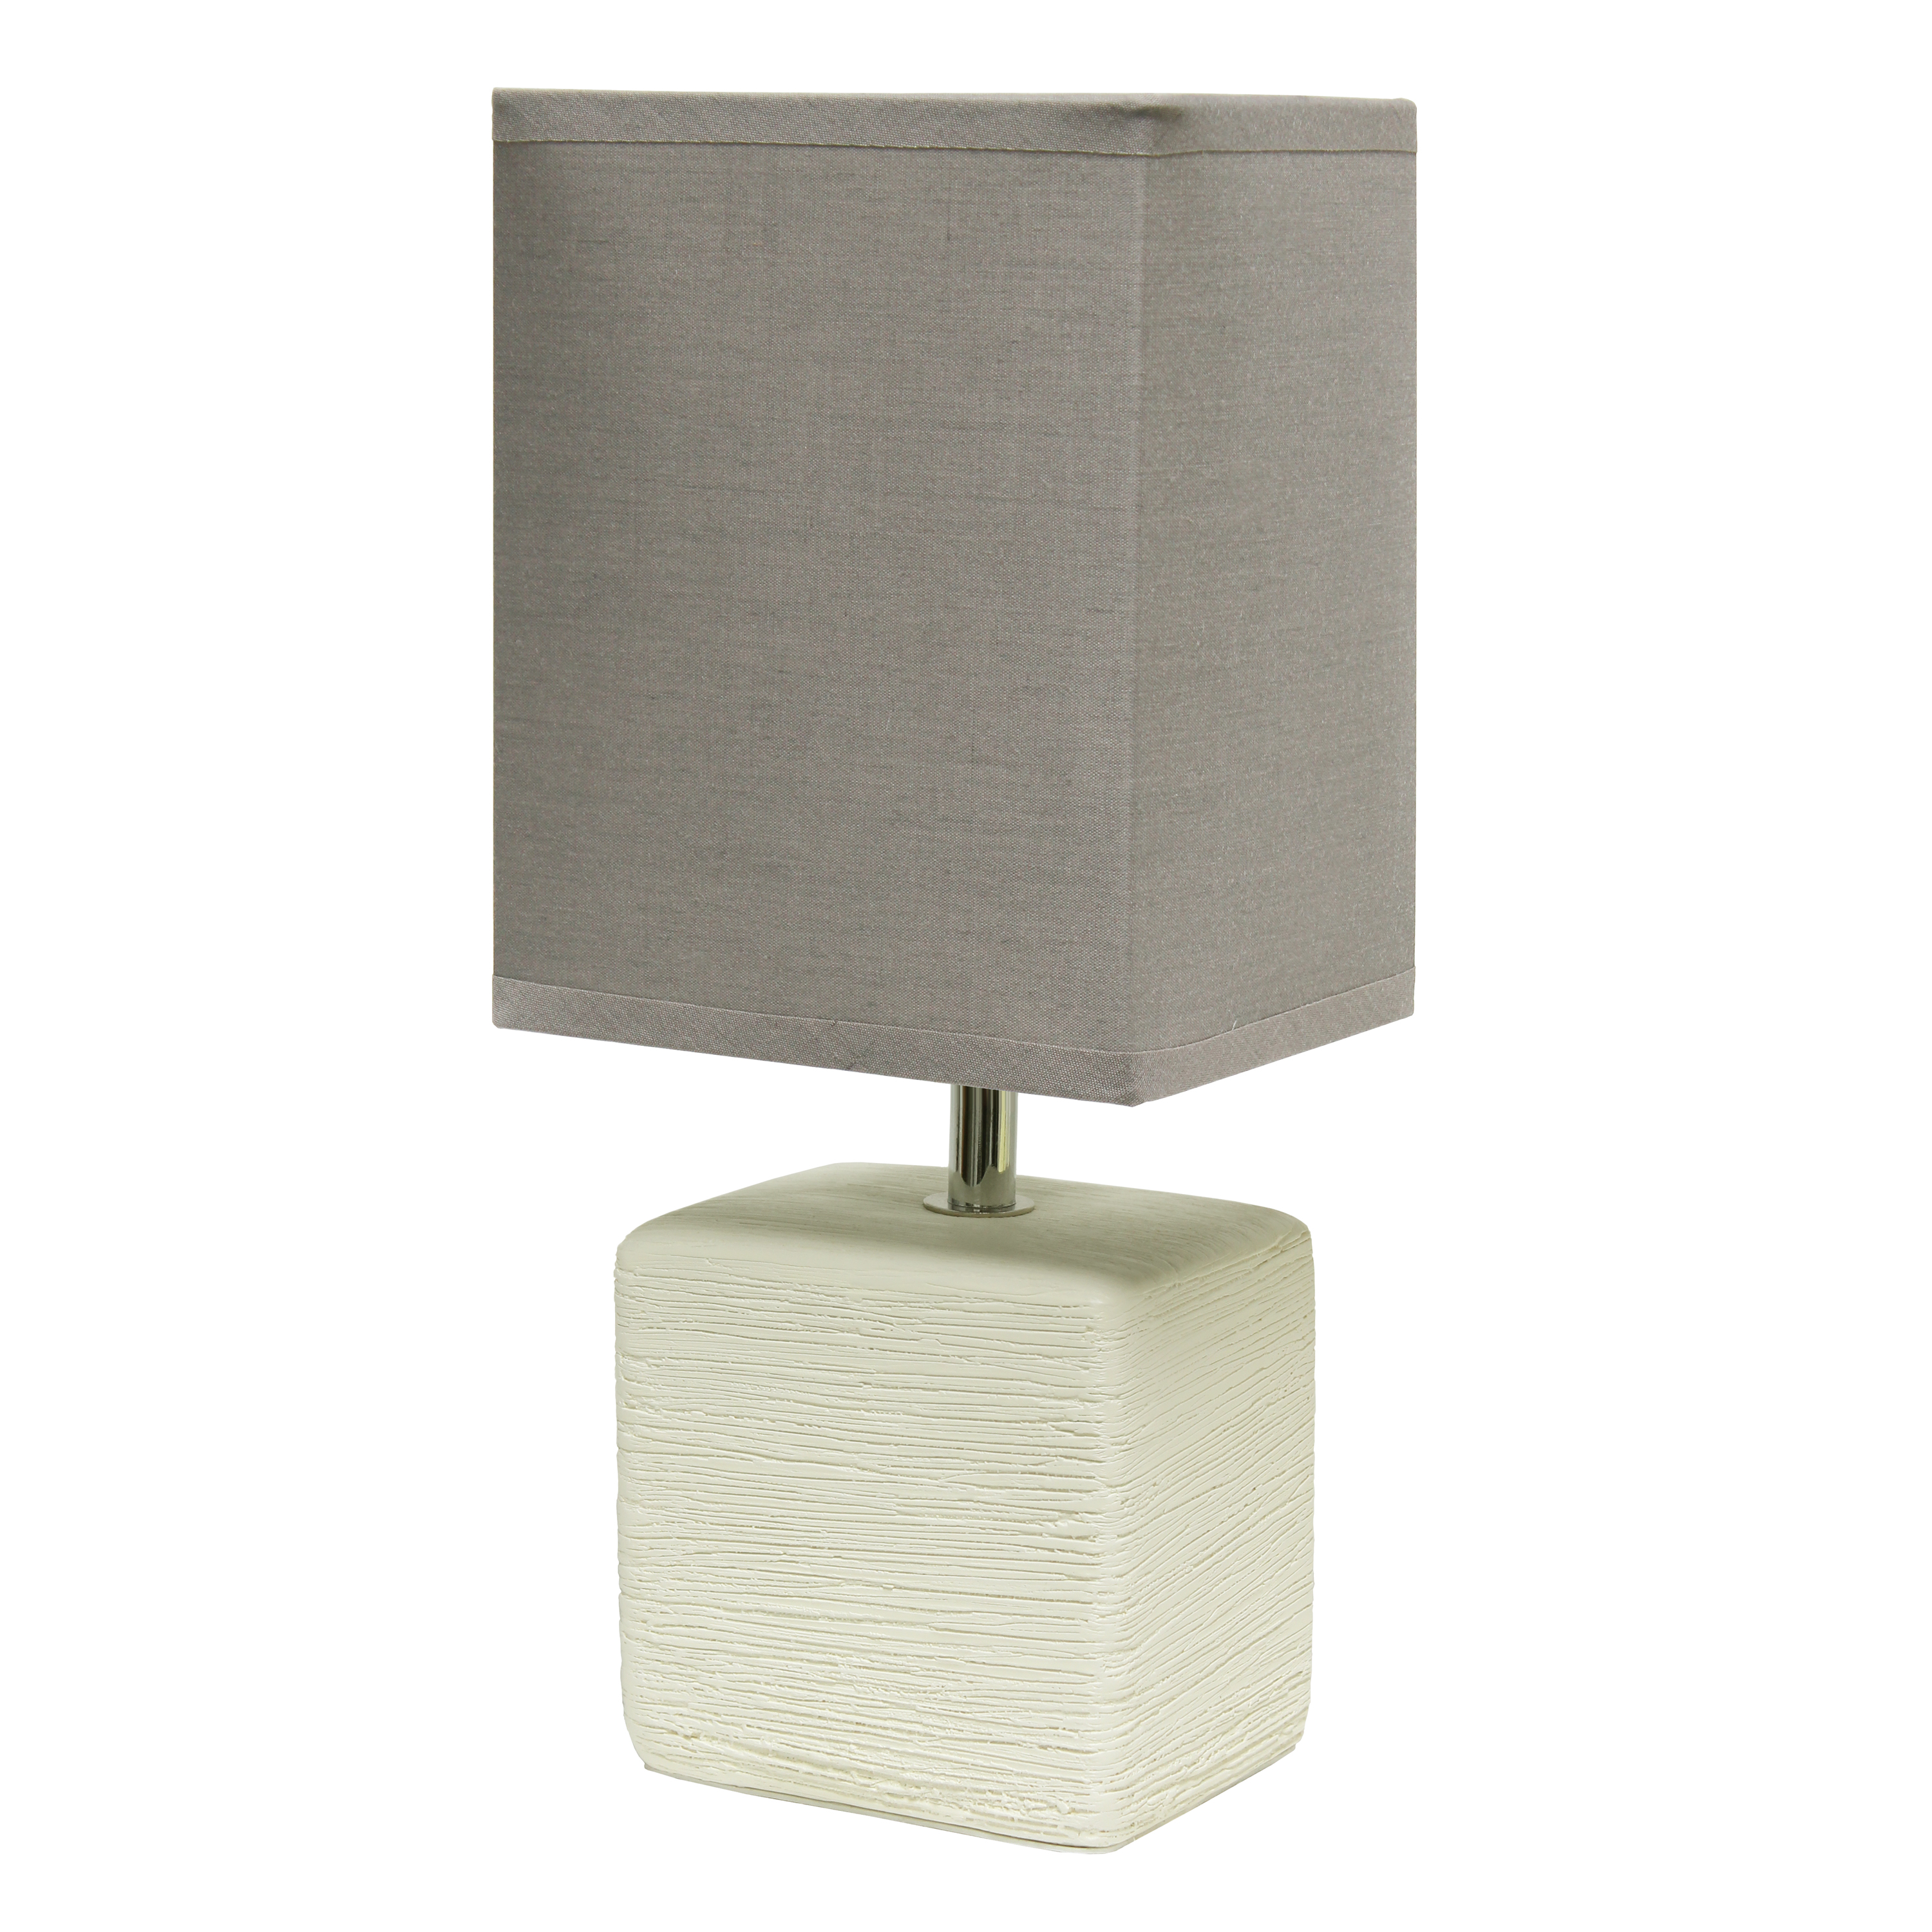 Simple Designs Petite Faux Stone Table Lamp with Fabric Shade, OffWhite with Gray Shade